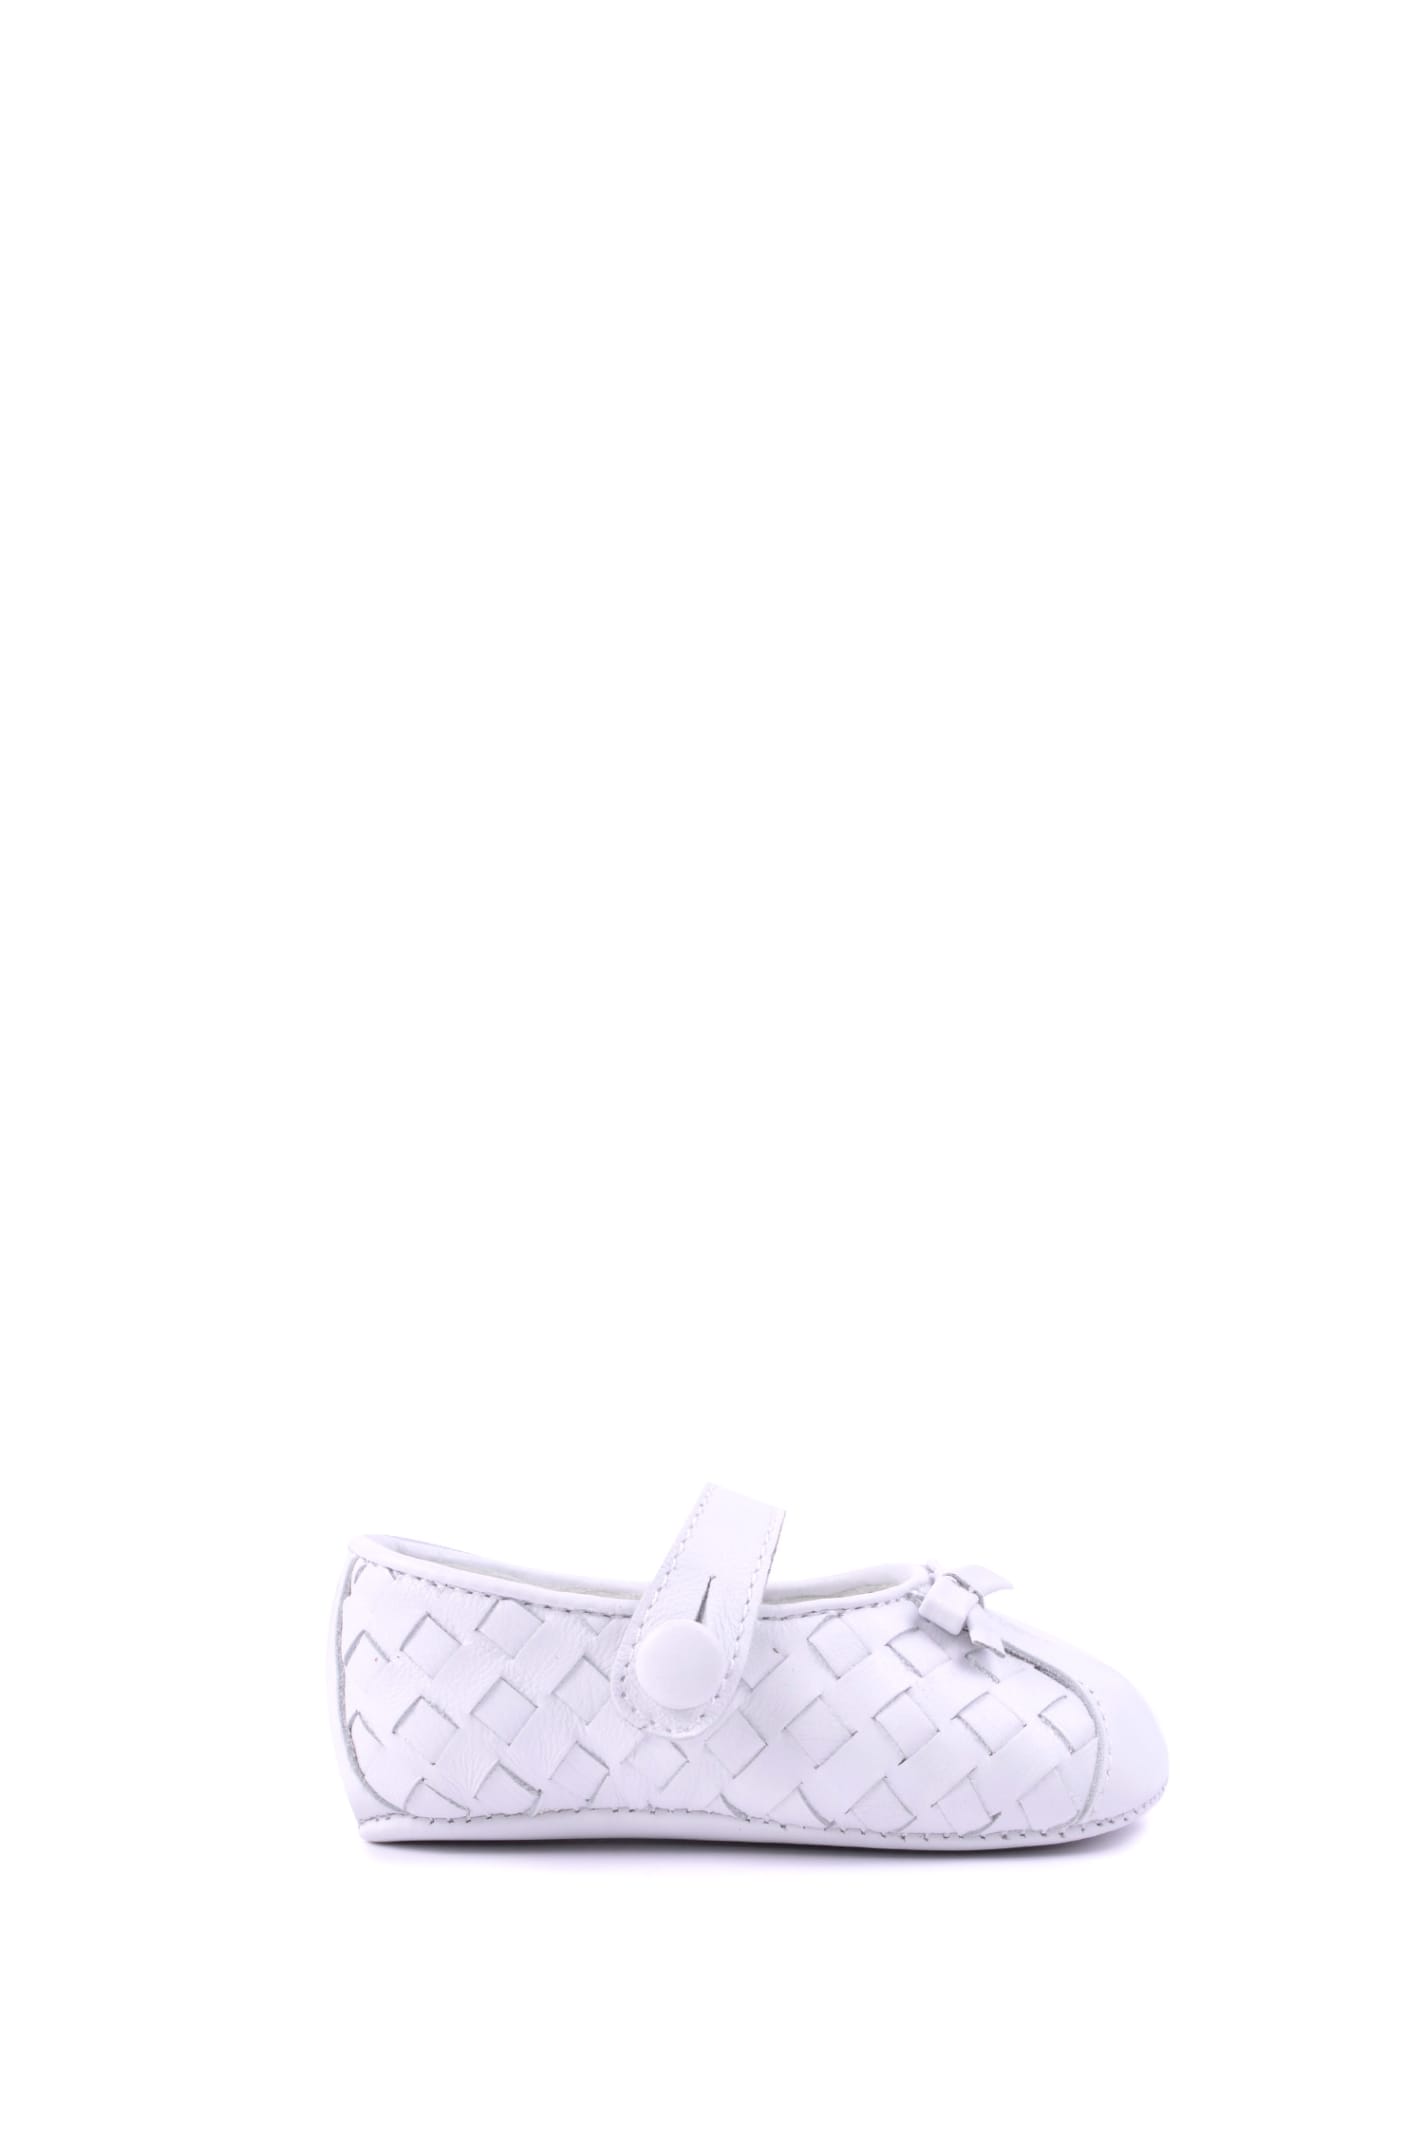 Gallucci Kids' Leather Shoes In White